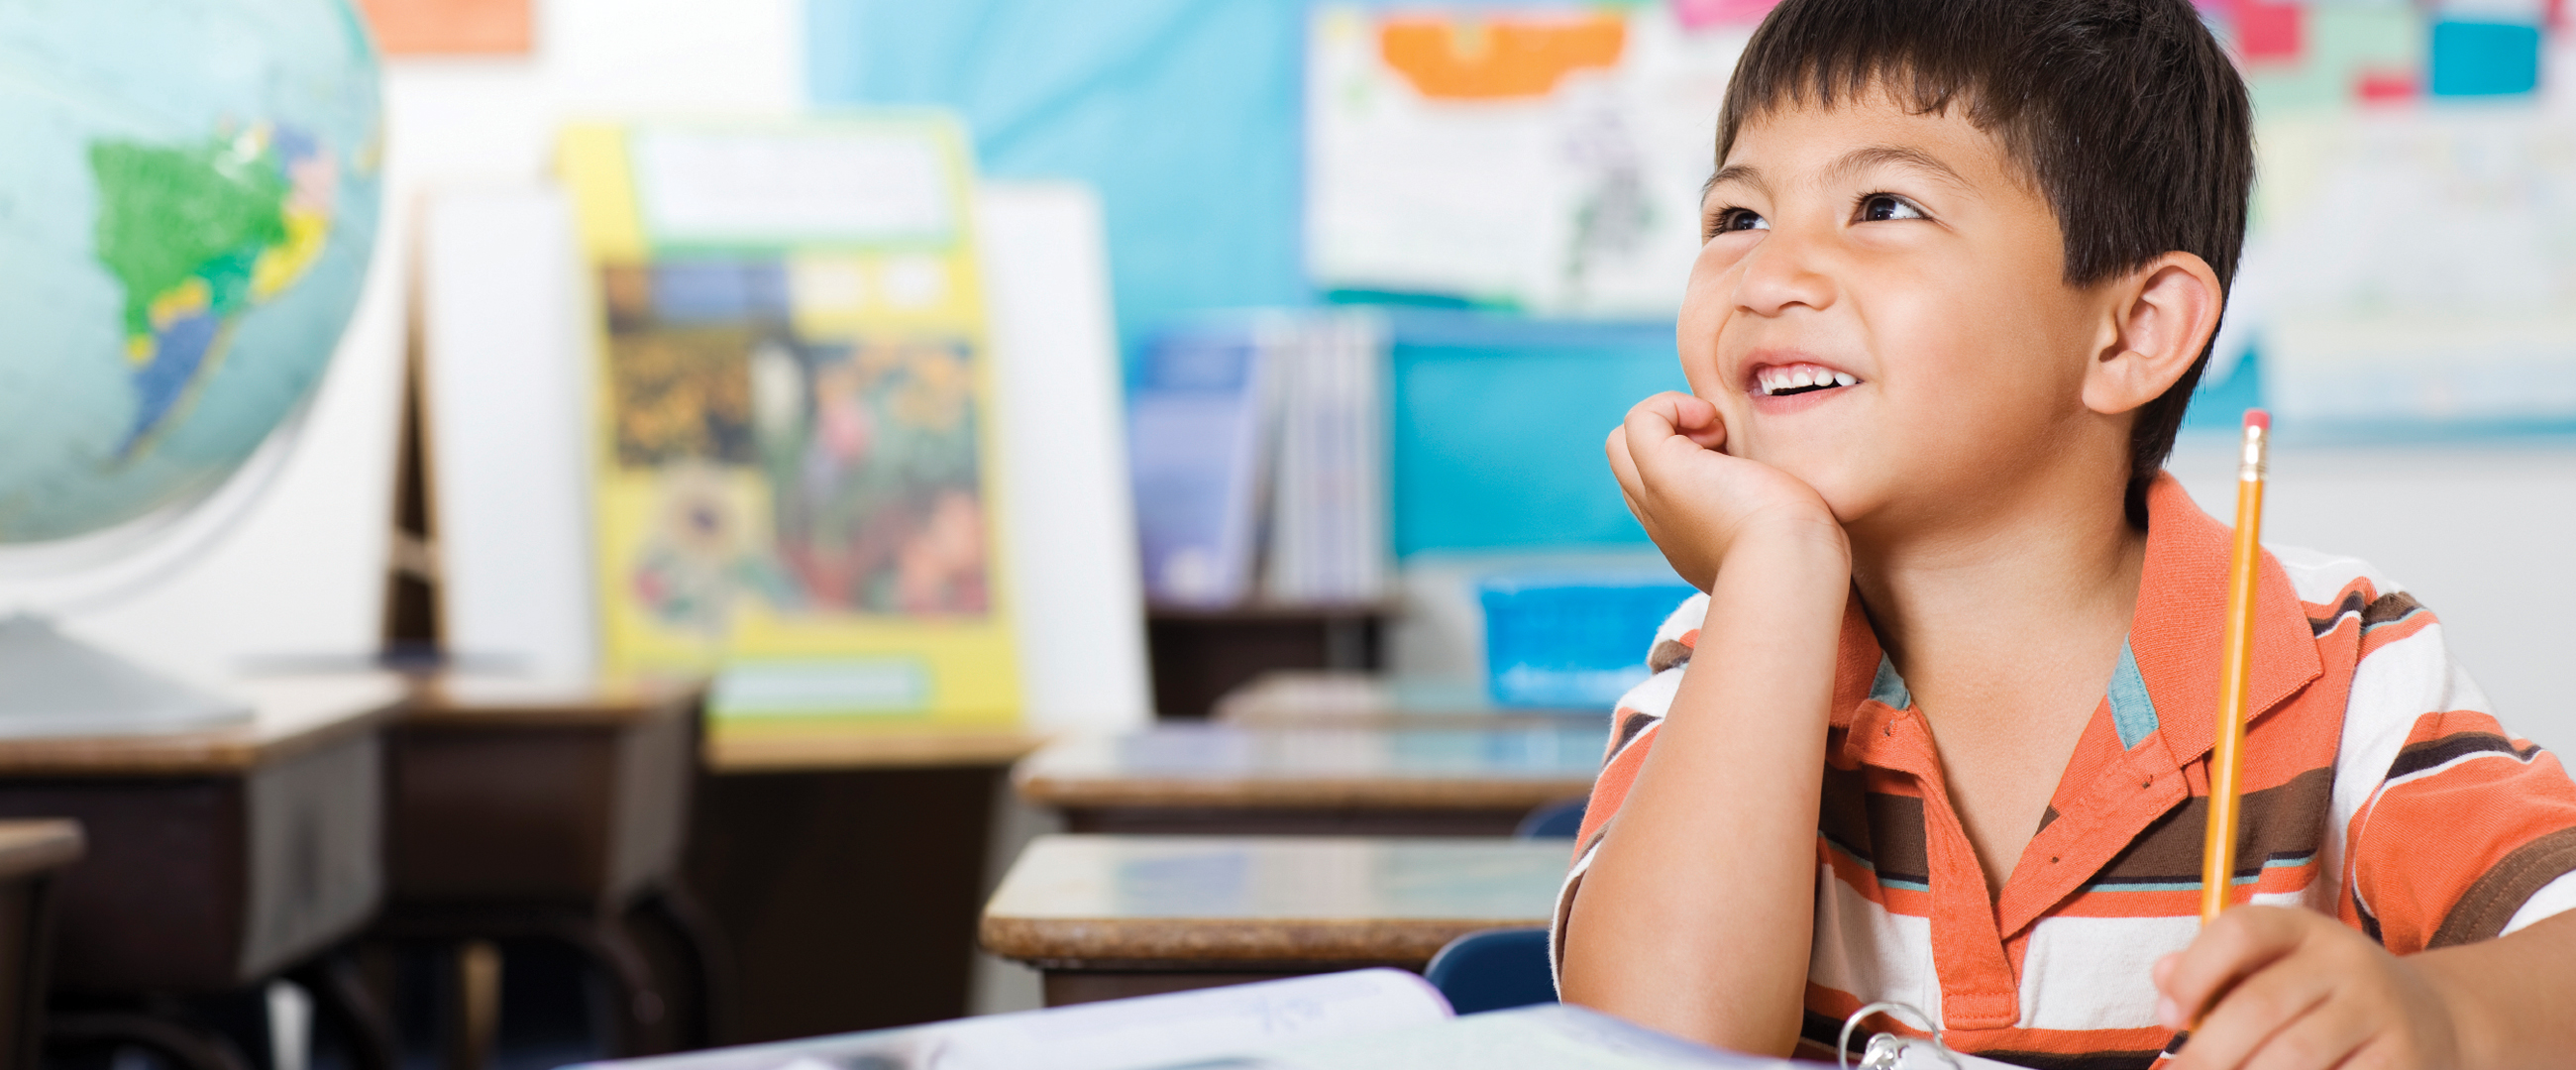 young smiling boy in classroom